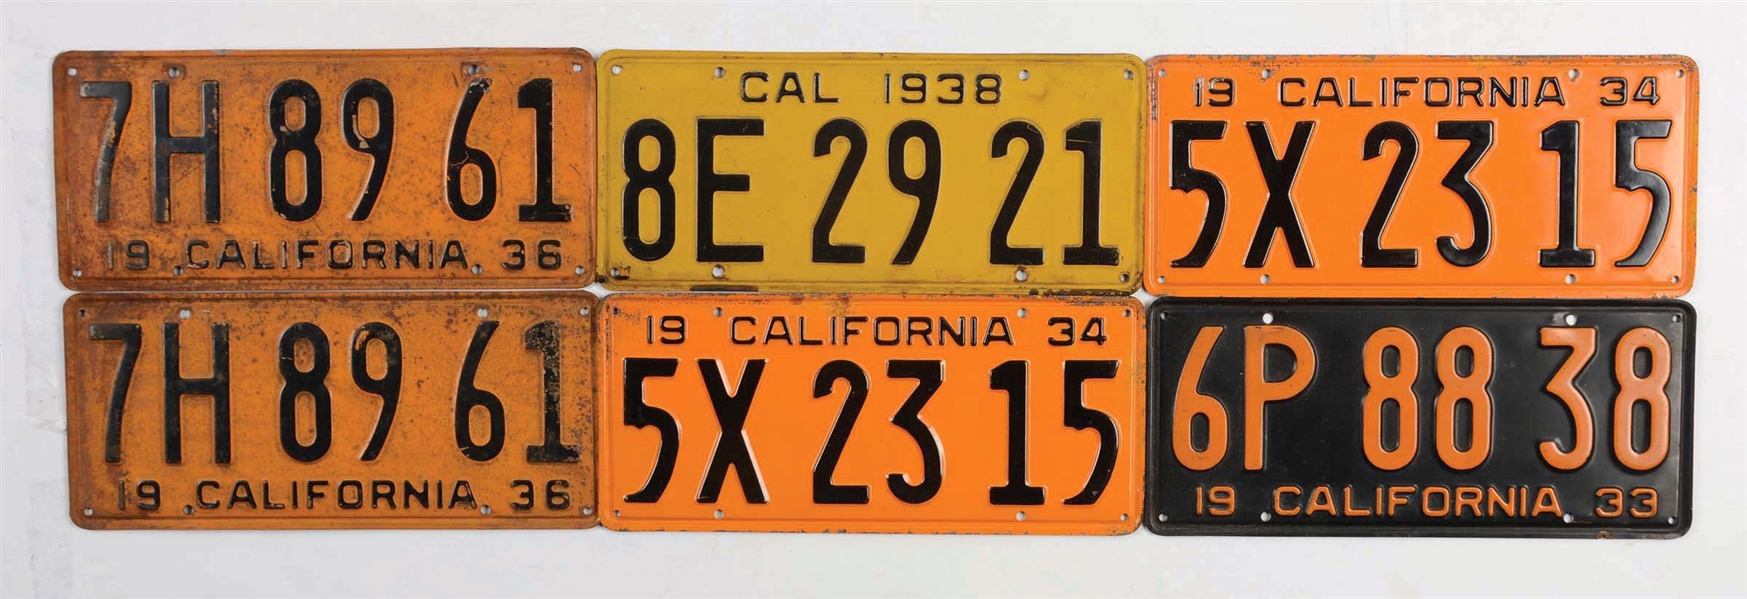 LOT OF 22: 11 PAIRS OF CALIFORNIA LICENSE PLATES FROM 1920-1939.